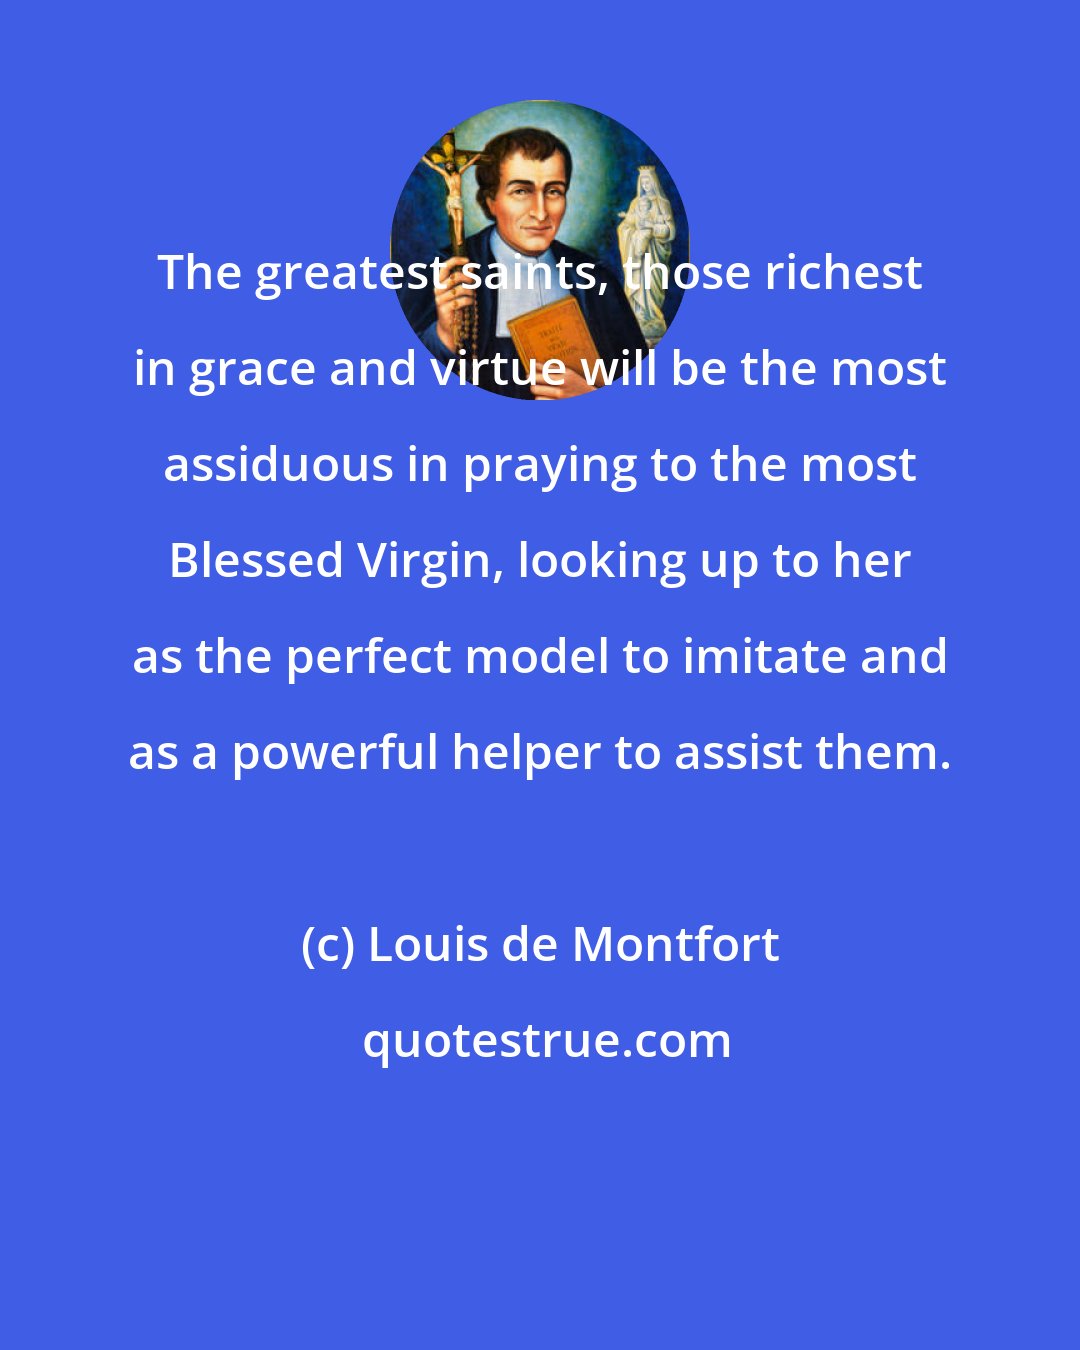 Louis de Montfort: The greatest saints, those richest in grace and virtue will be the most assiduous in praying to the most Blessed Virgin, looking up to her as the perfect model to imitate and as a powerful helper to assist them.